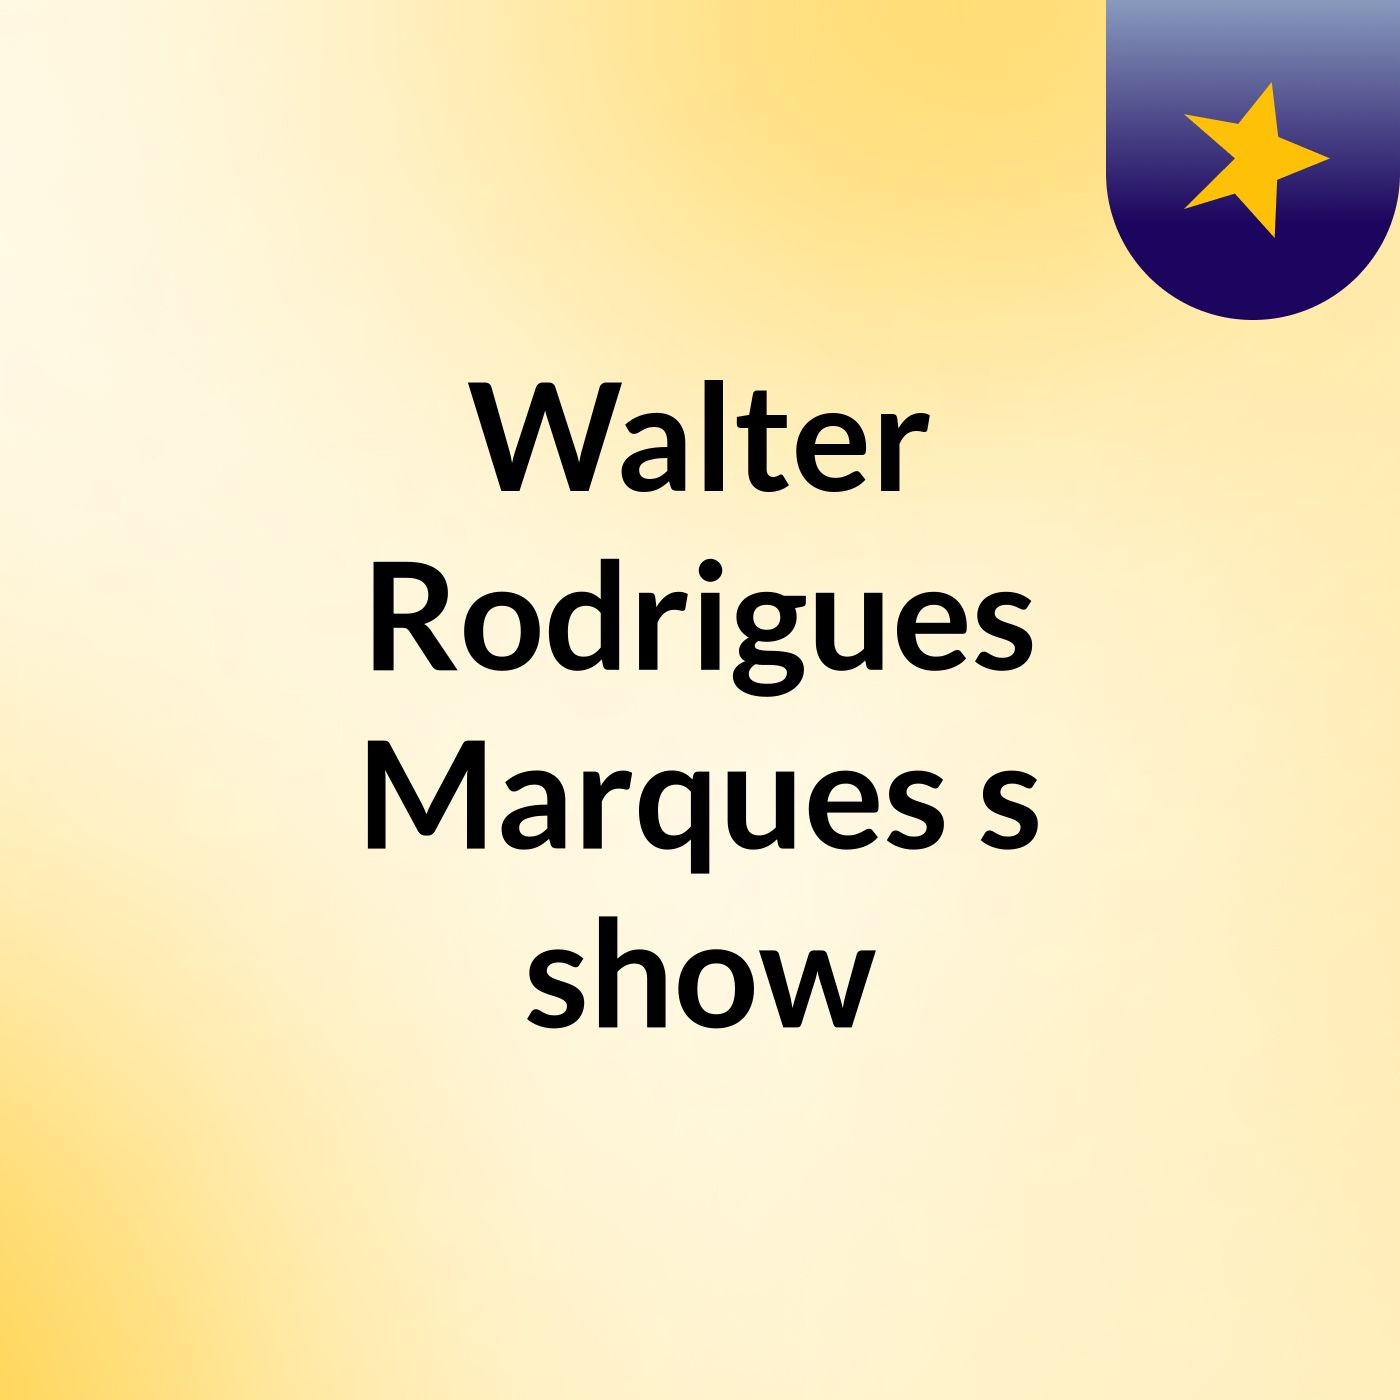 Walter Rodrigues Marques's show